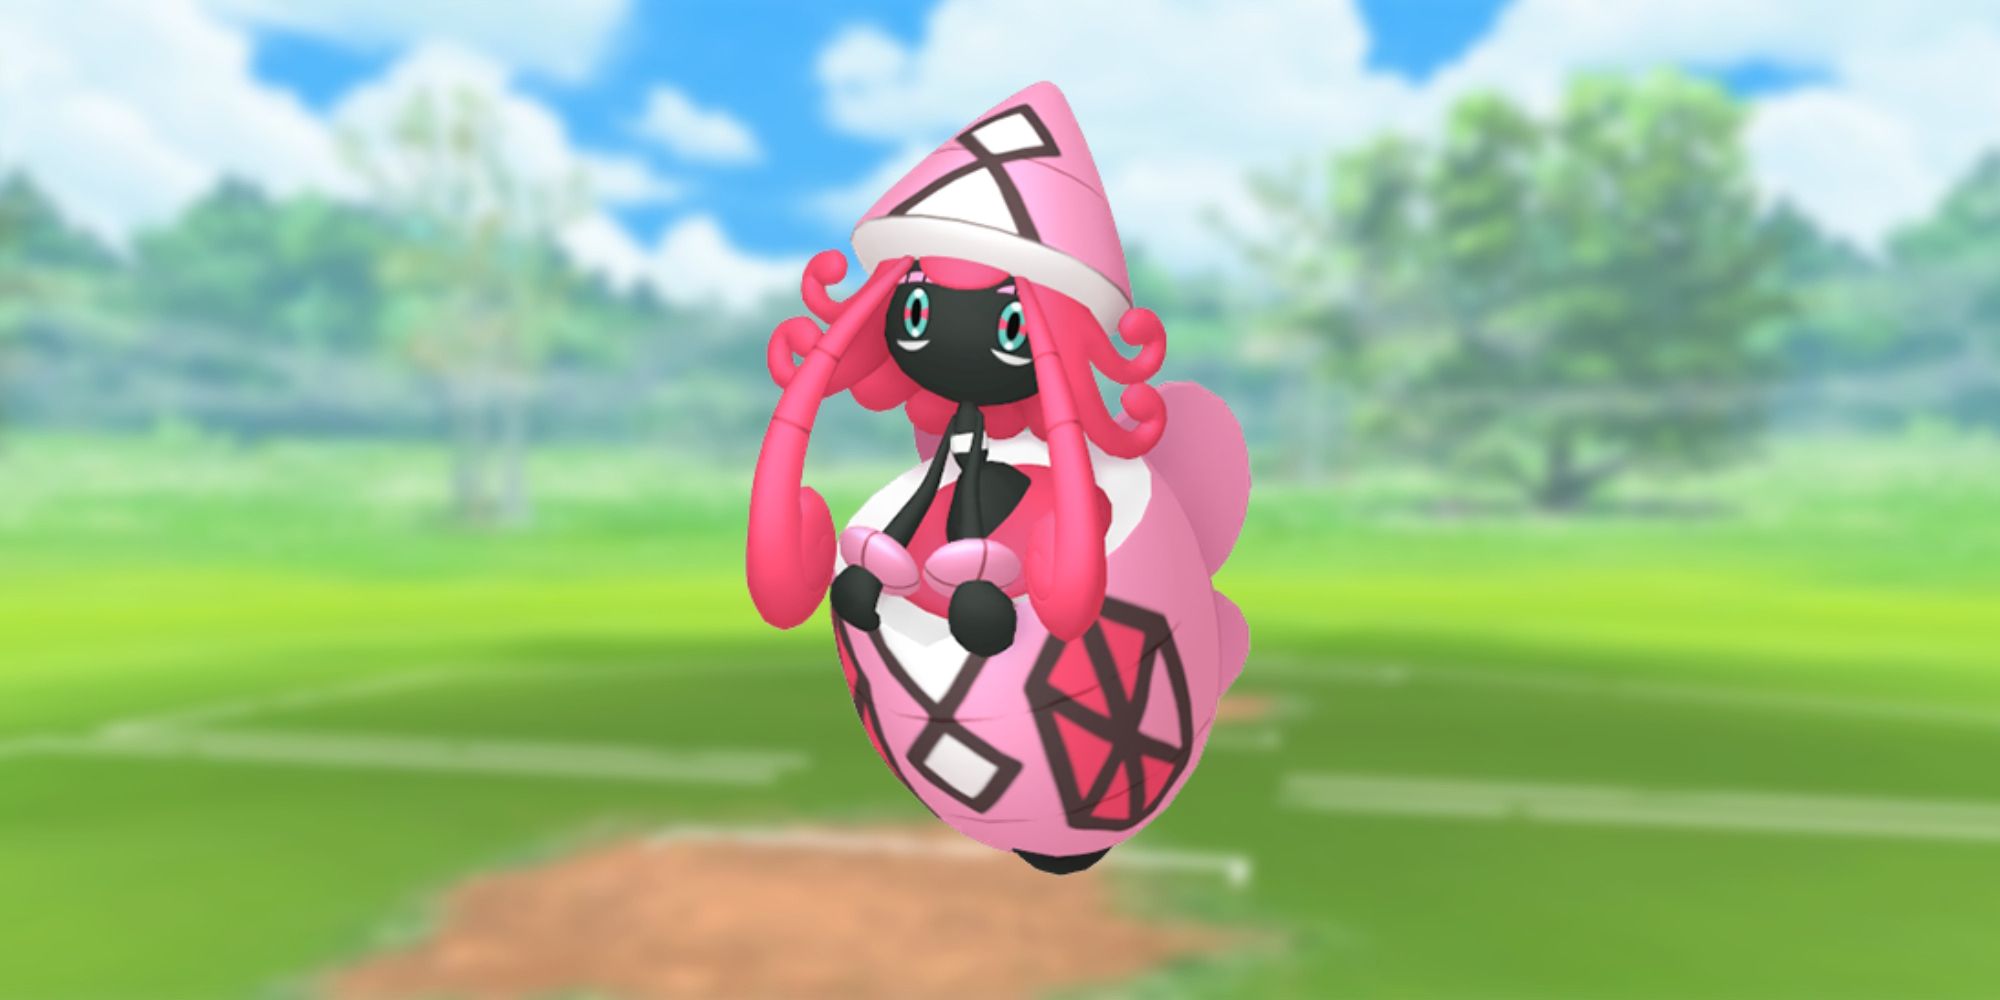 Tapu Lele from Pokemon with the Pokemon Go battlefield as the background